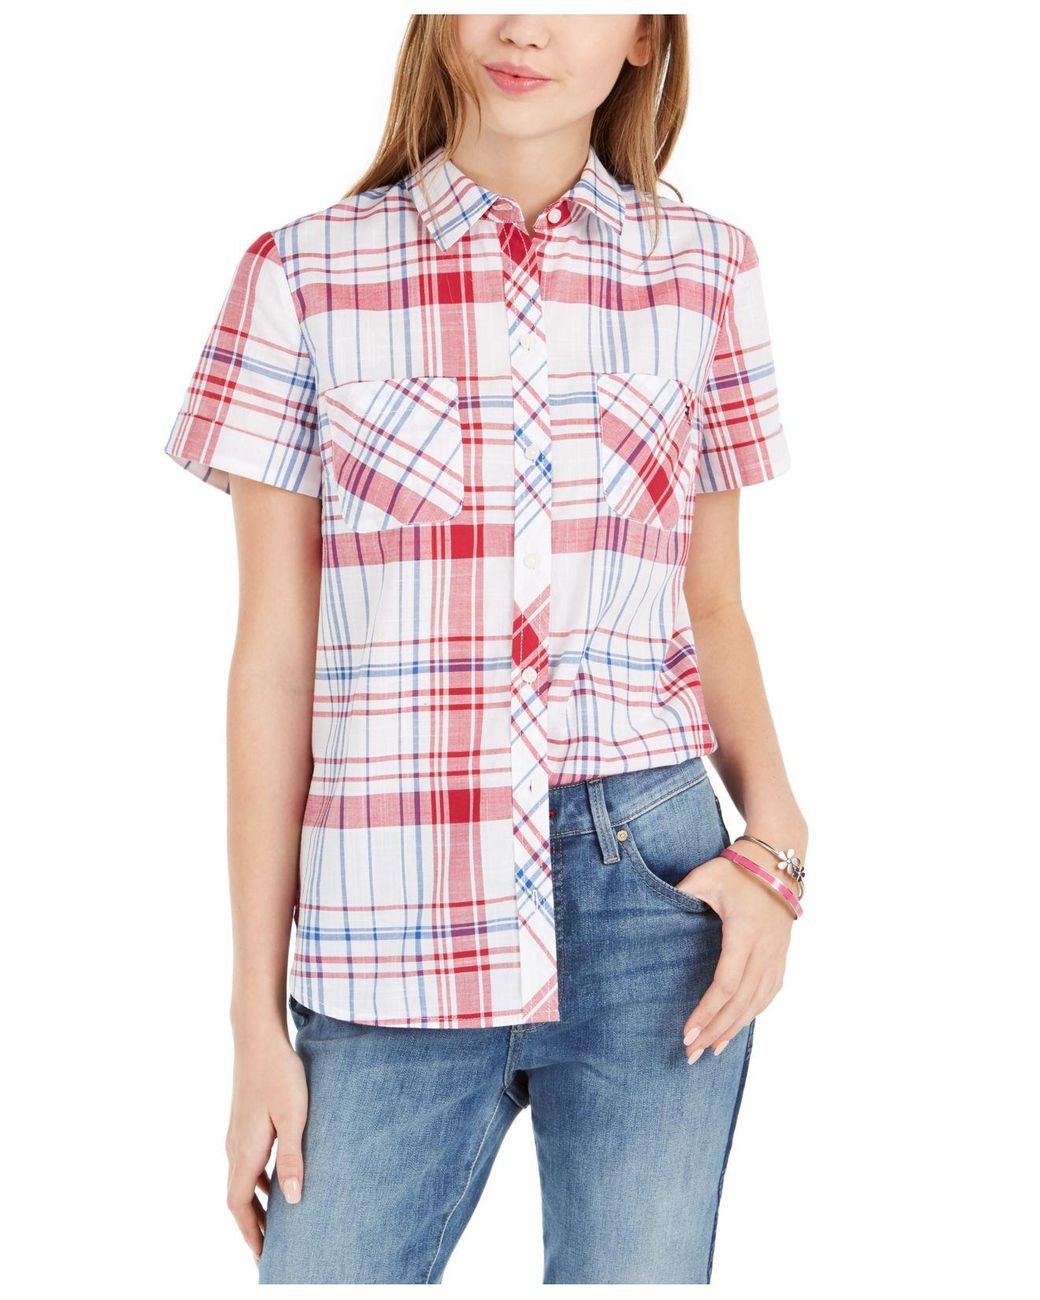 Tommy Hilfiger Cotton Plaid Camp Shirt in Red - Lyst